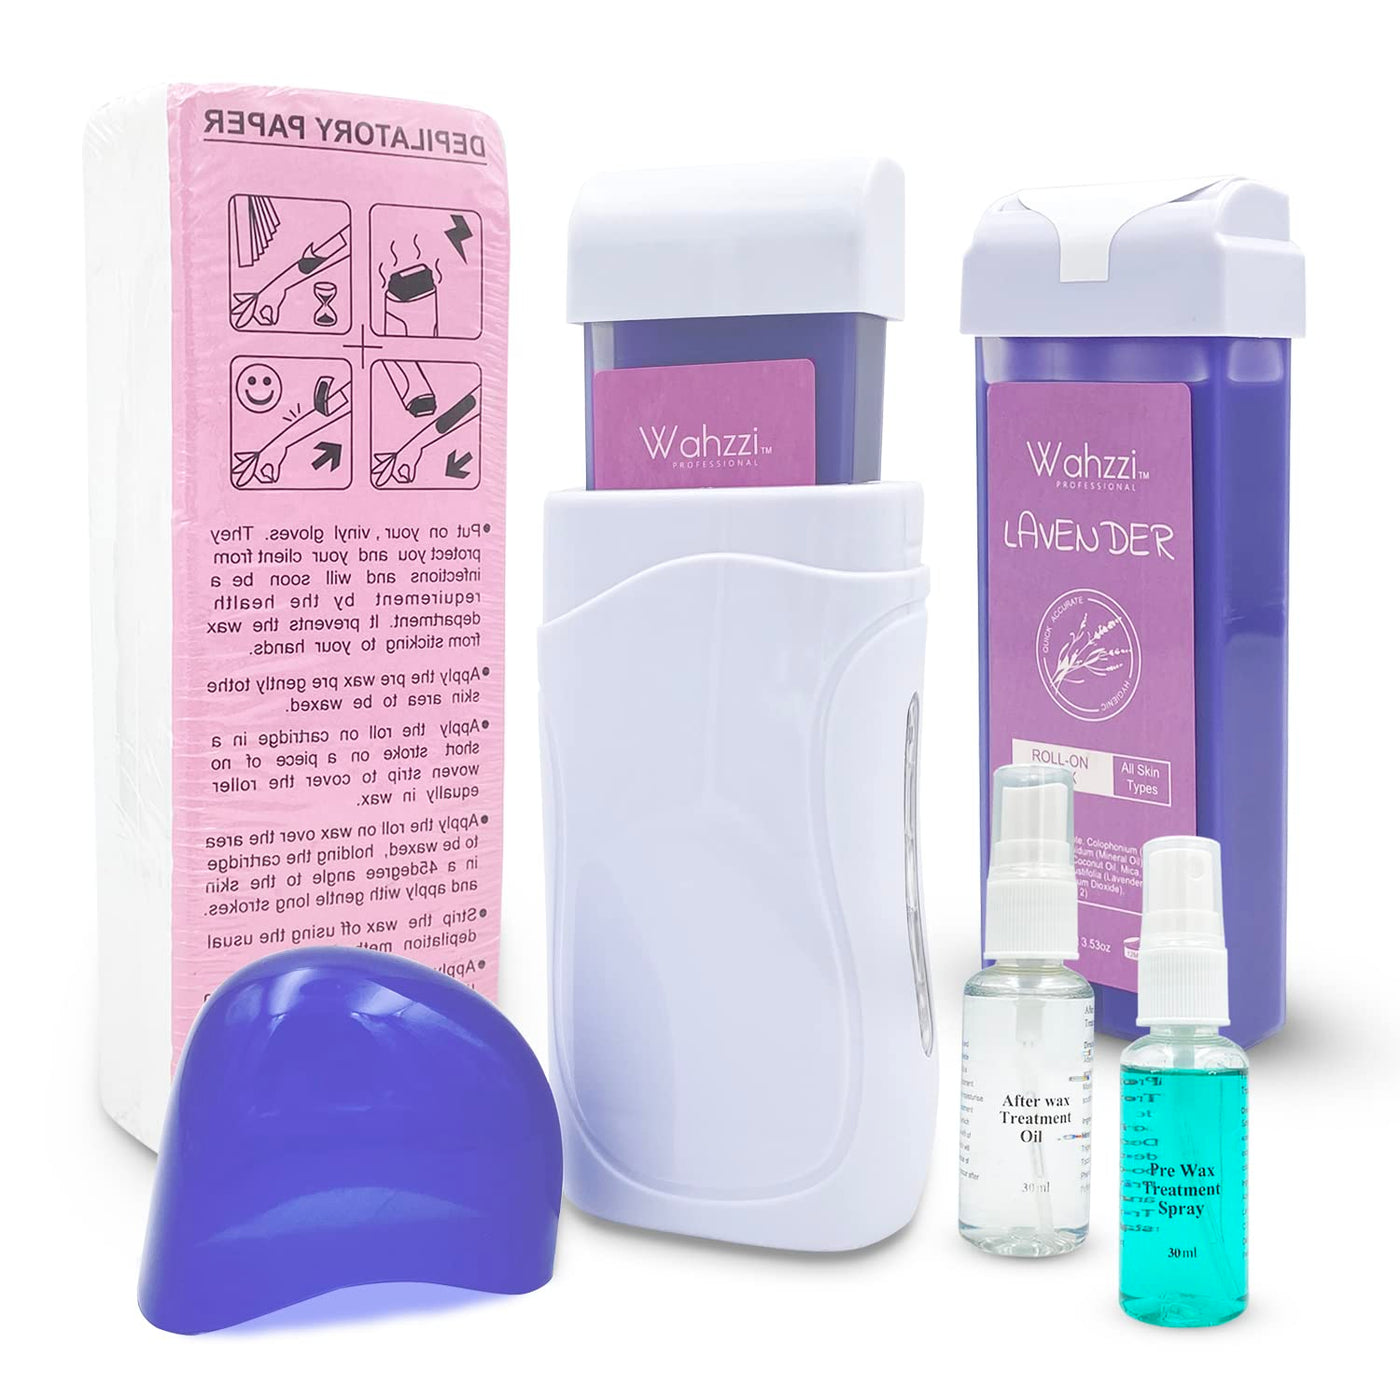 Roll on Wax Kit for Hair Removal, Wax Roller Machine